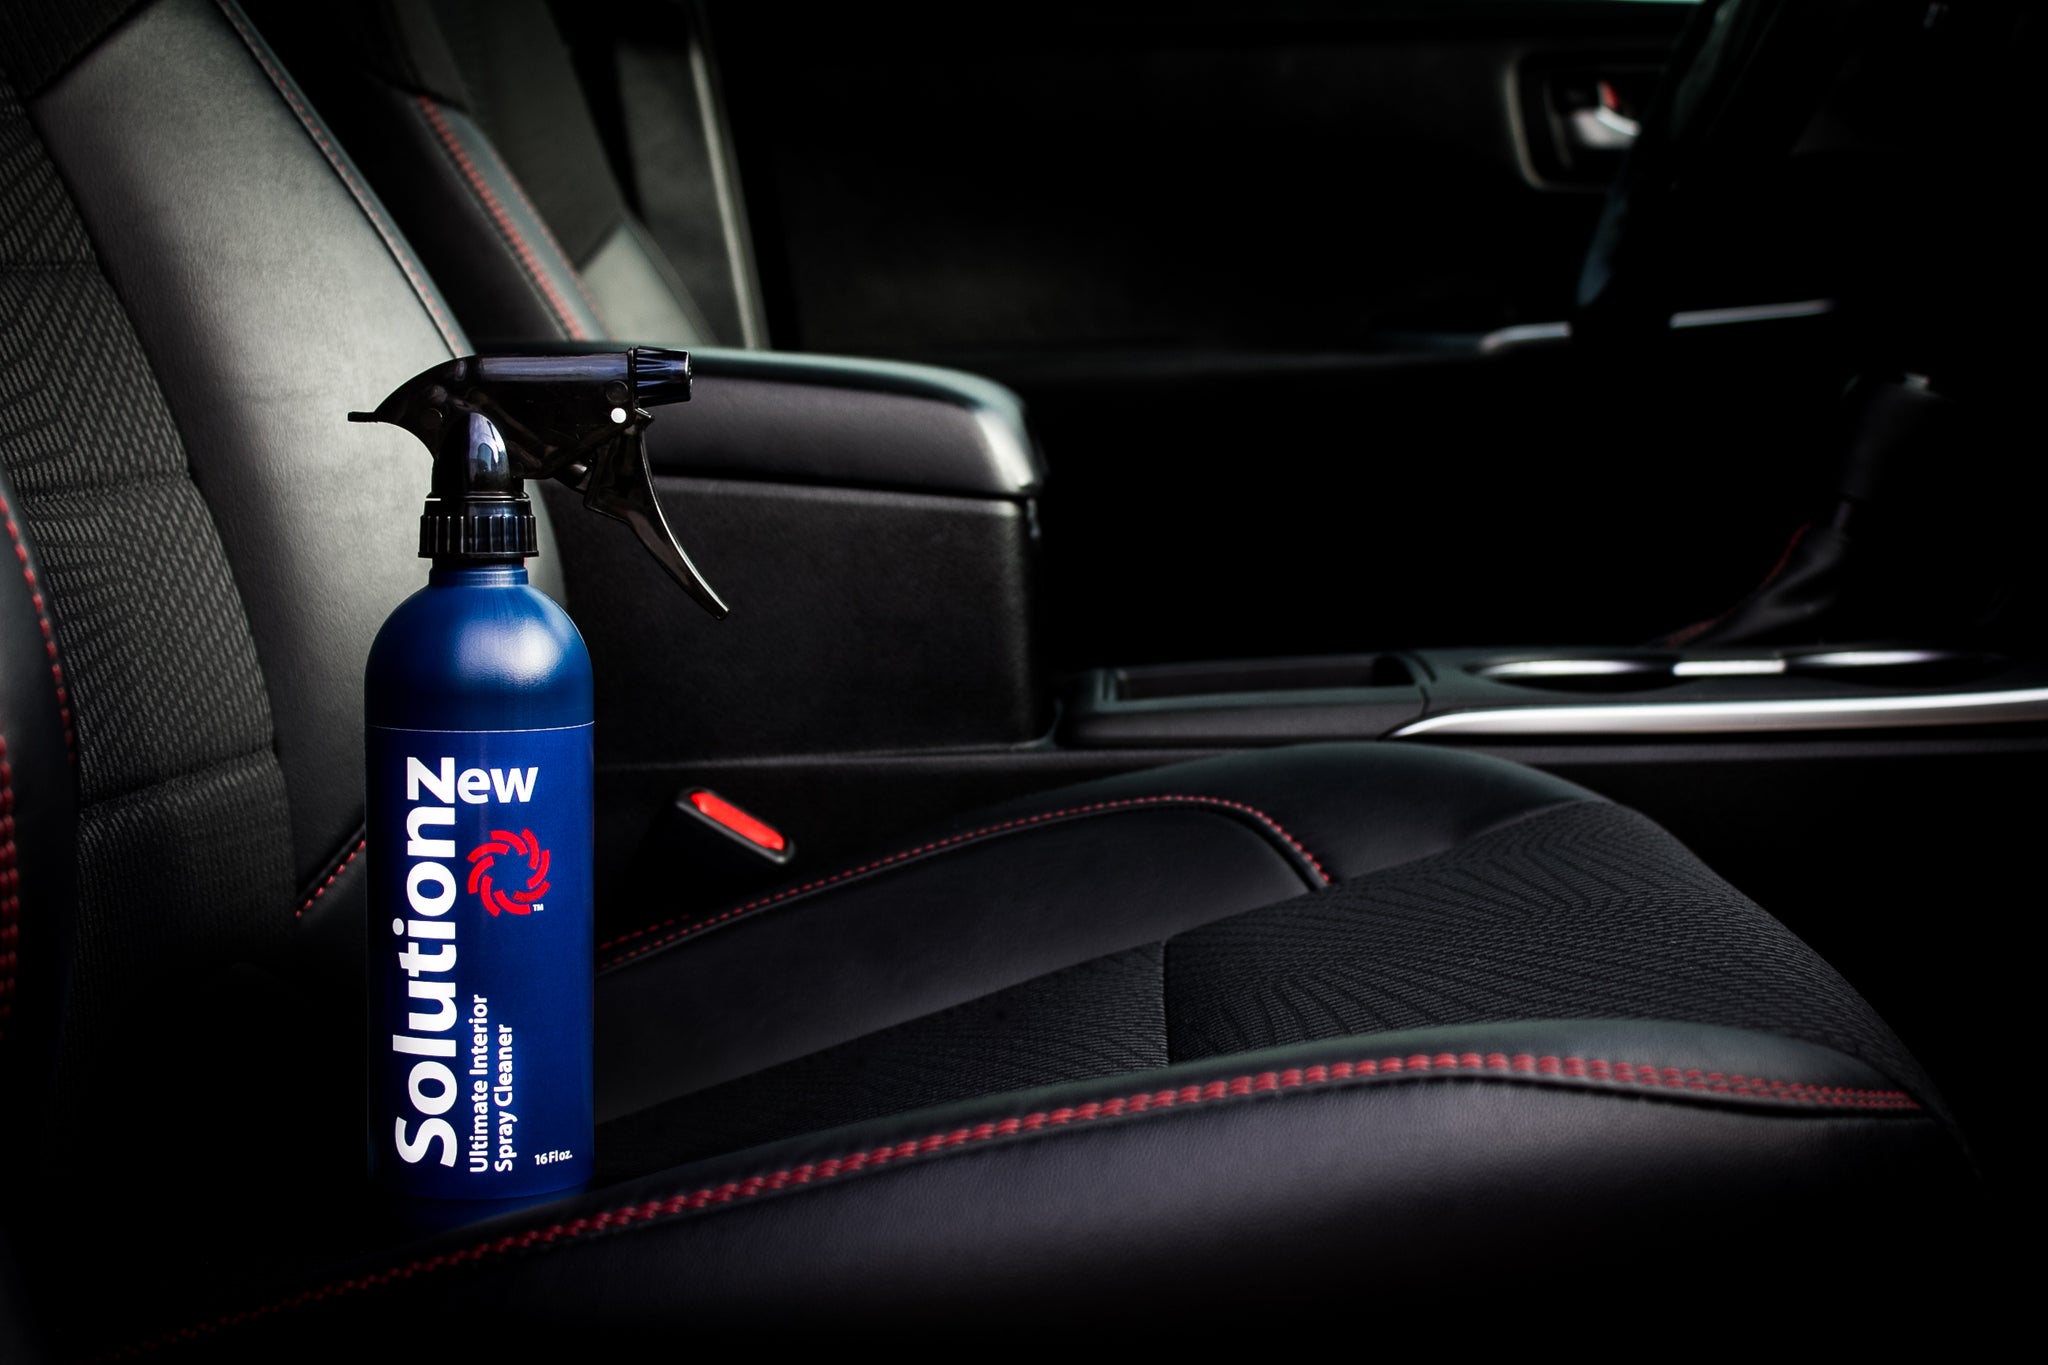 Interior Car Cleaner, Car Seat & Upholstery Cleaner